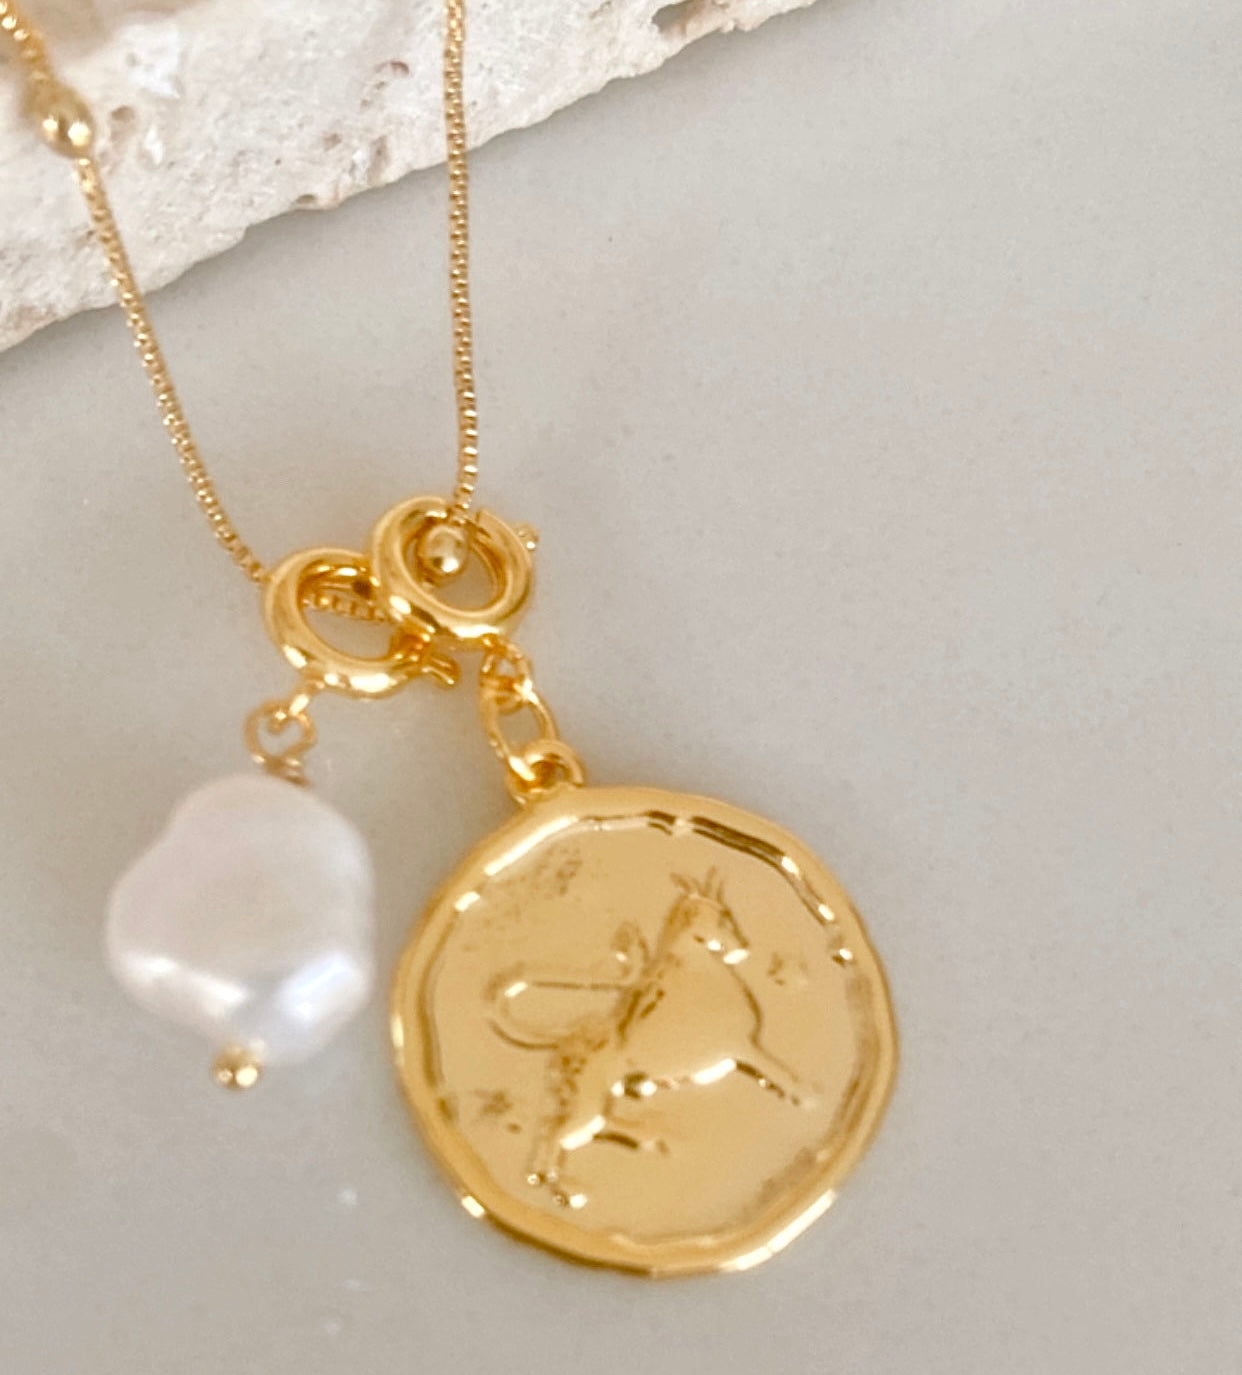 Zodiac with Freshwater Pearl - Taurus April 21 - May 20